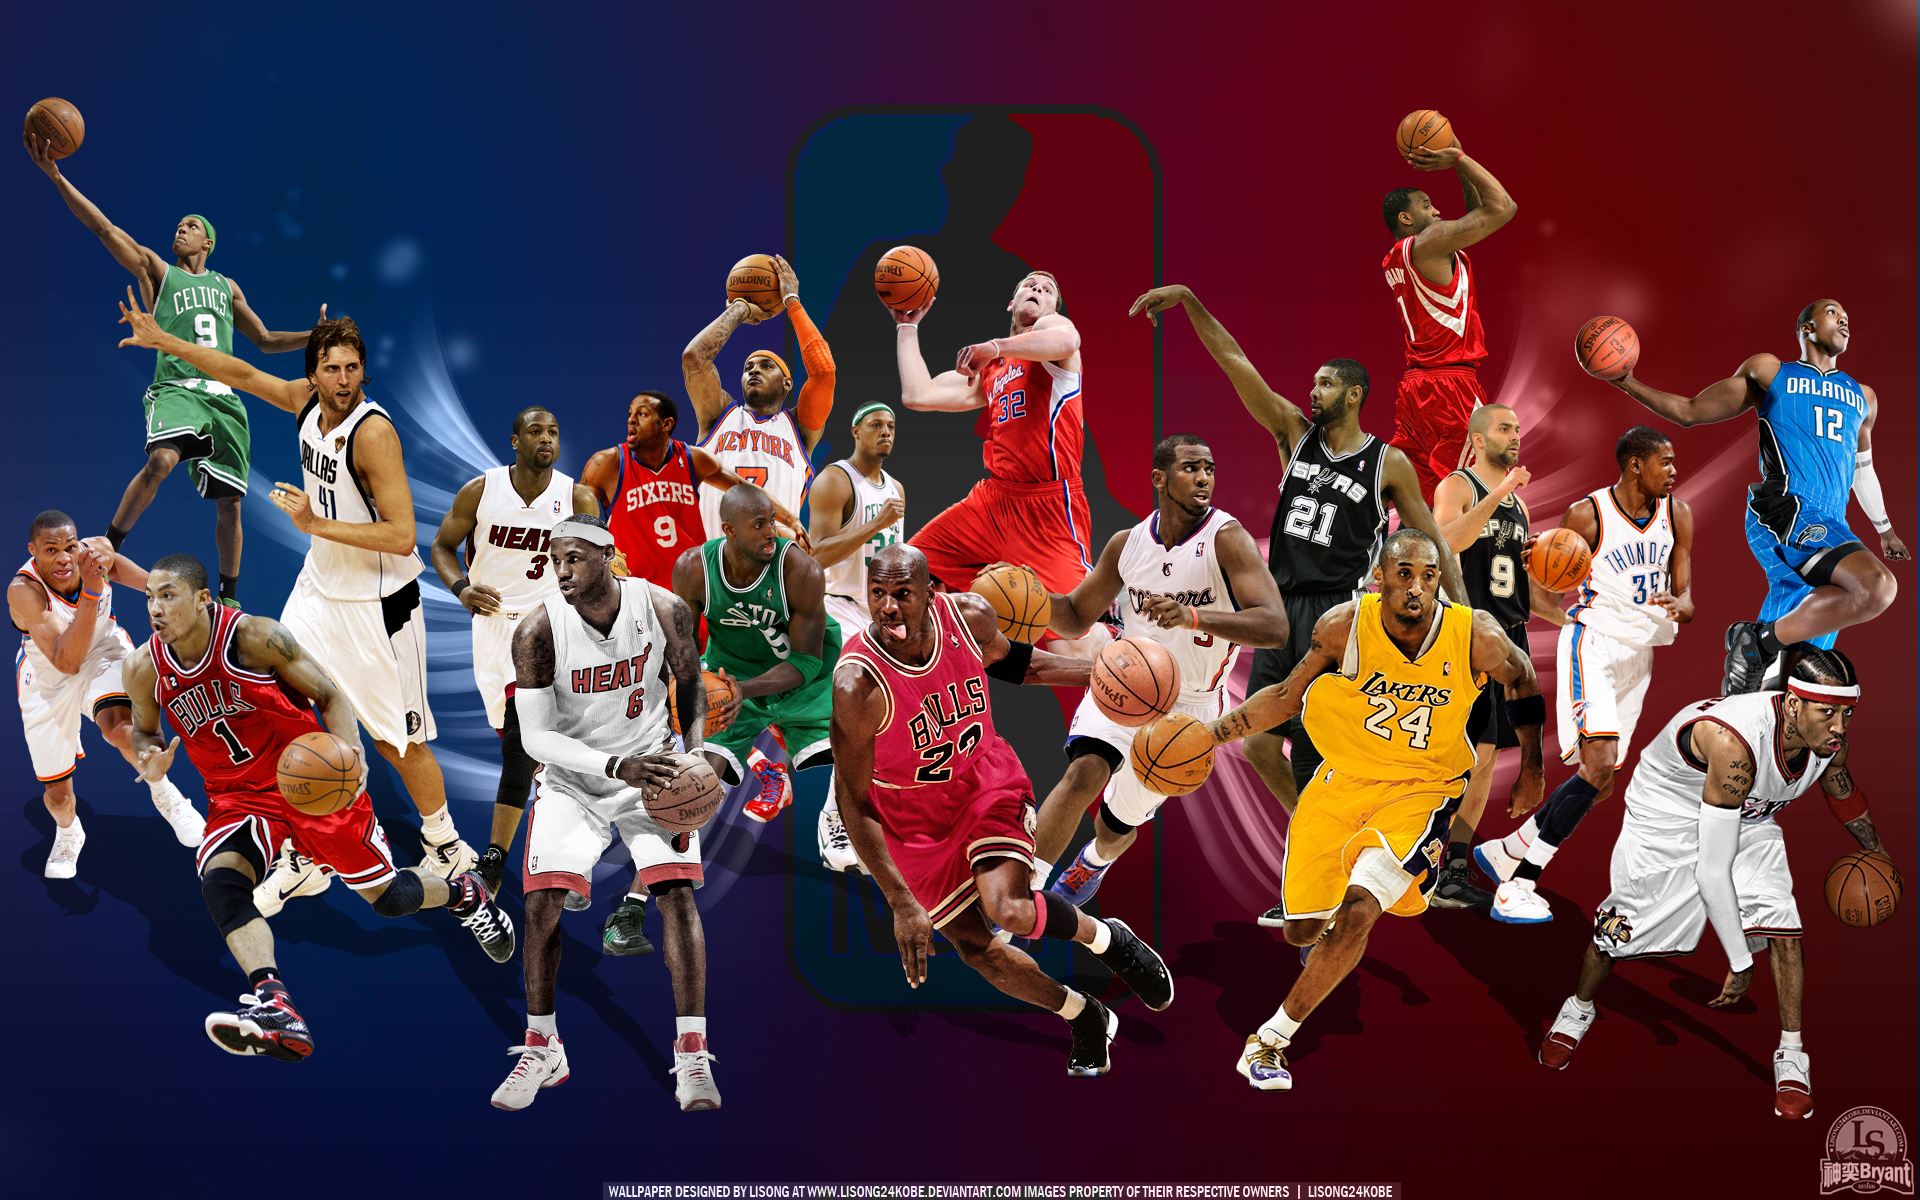 Wallpaper Basketball Nba Image Amp Pictures Becuo